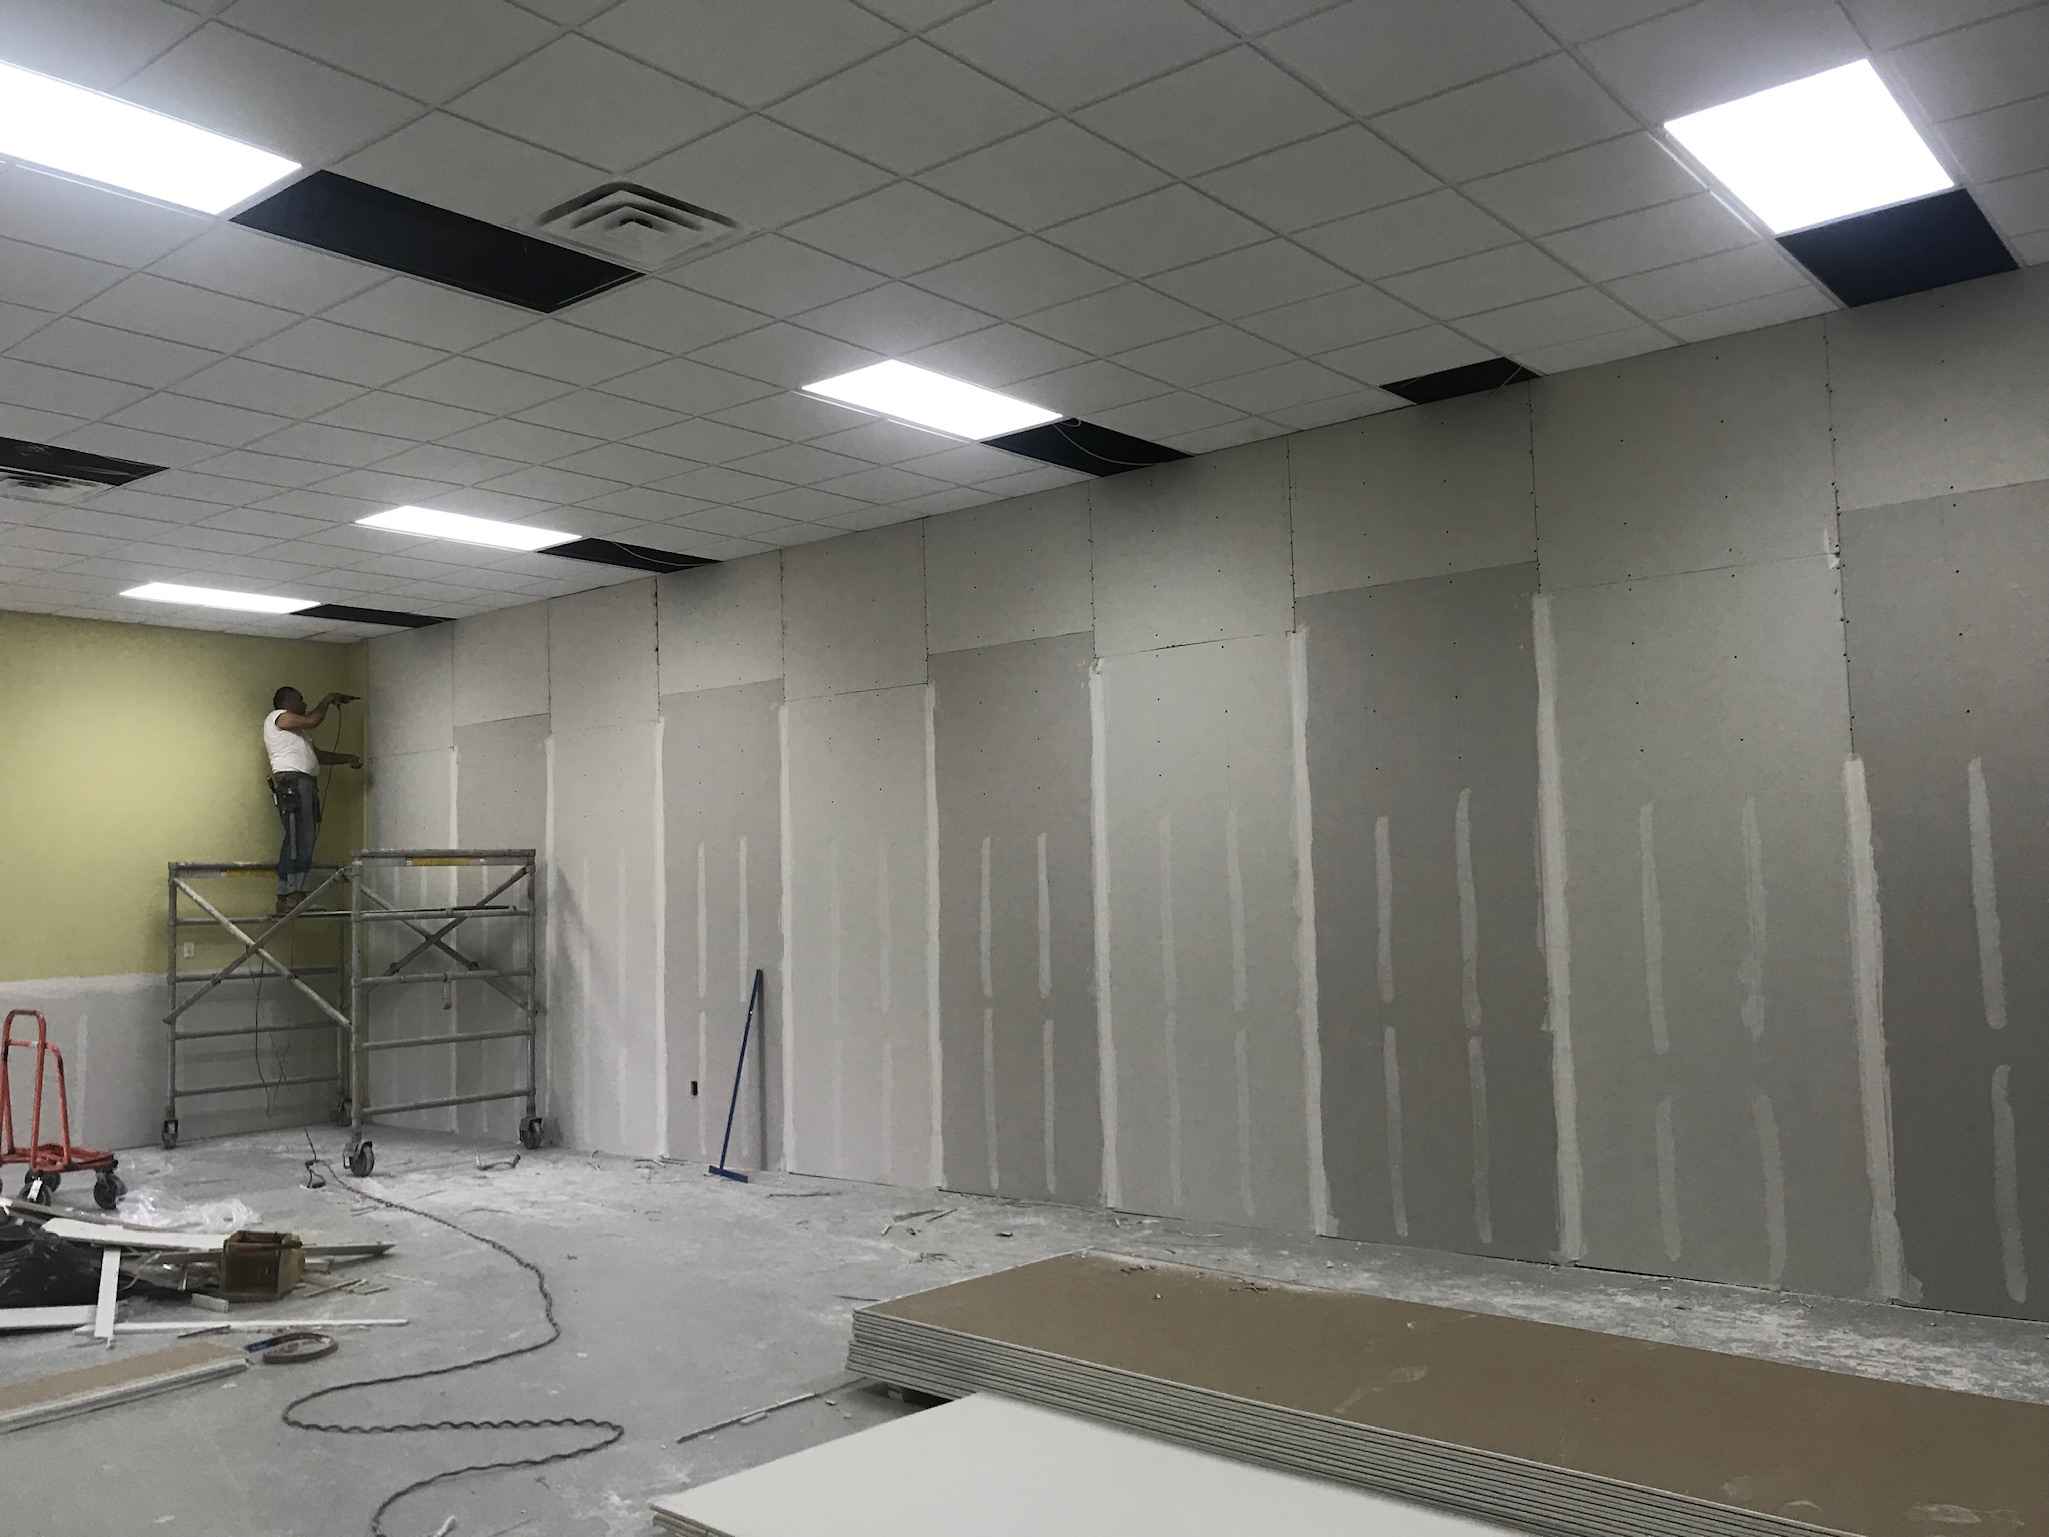 Drywall Contractor in Houston, Tx